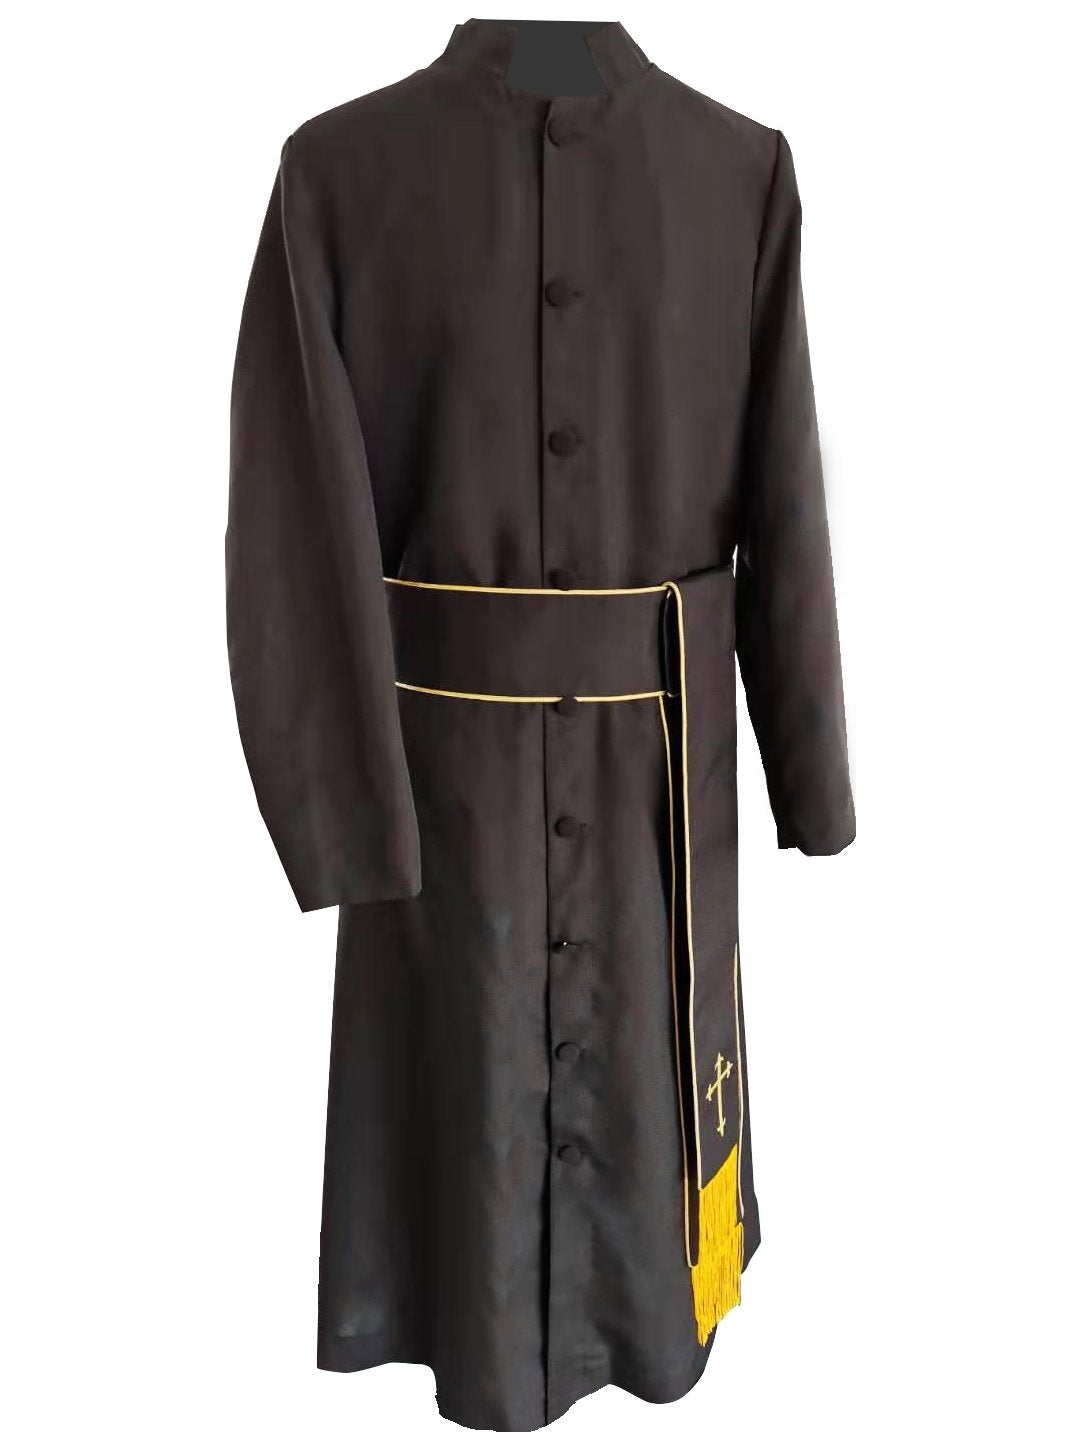 Black Clergy Band Cincture with Gold Piping